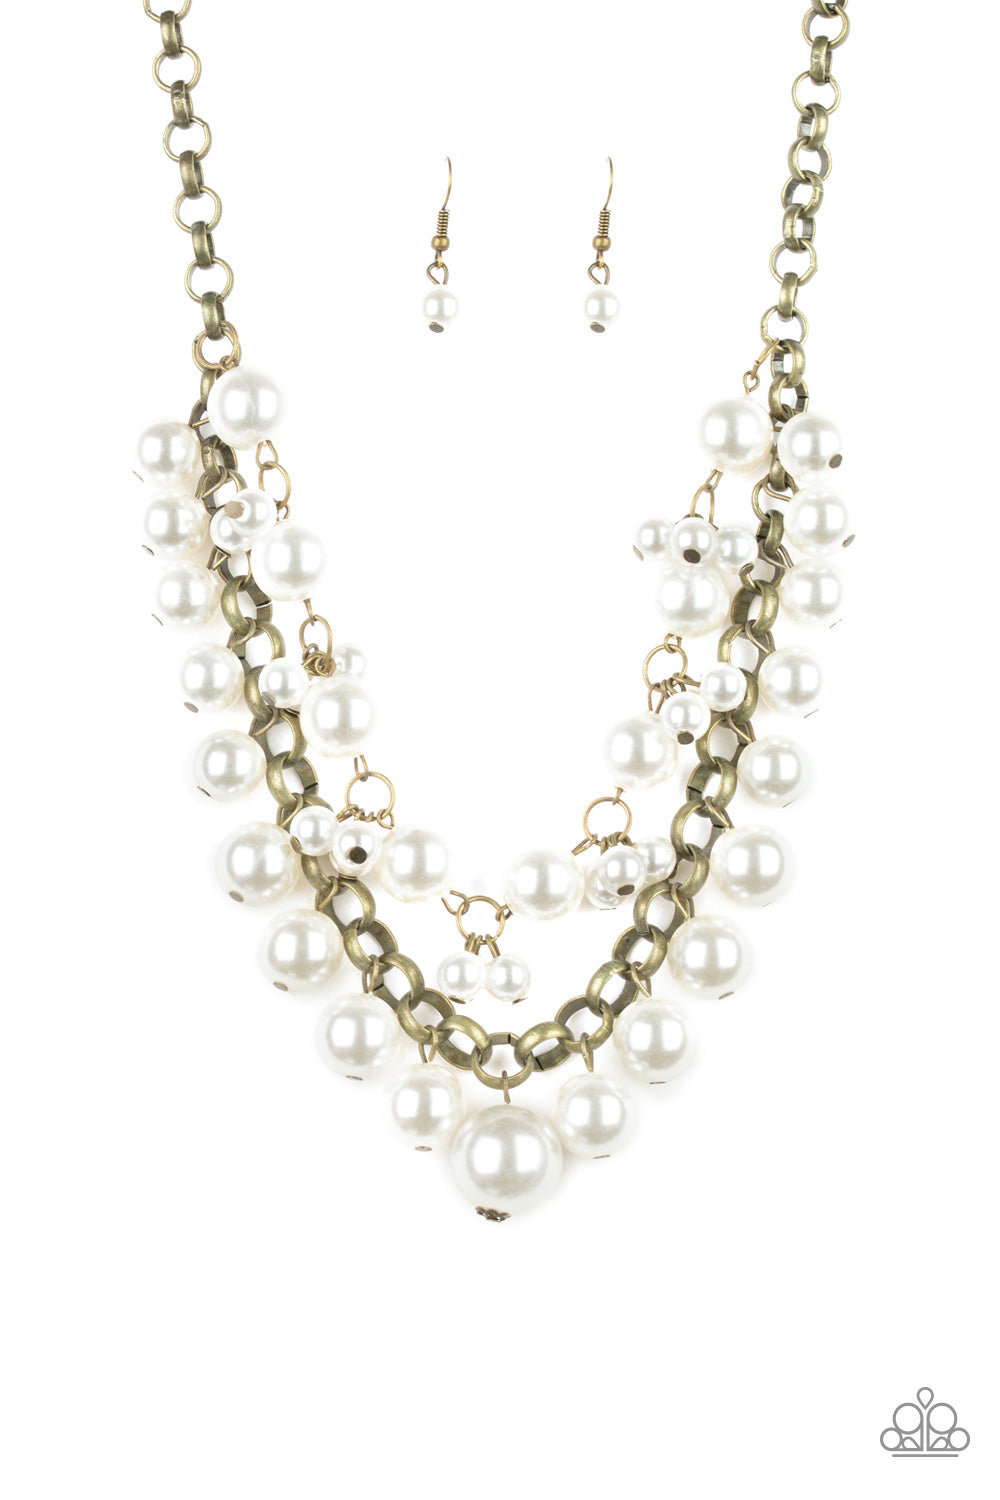 BALLROOM Service - Brass and White Pearl Necklace - Paparazzi Accessories - Two rows of mismatched white pearls gorgeously drape below the collar. Featuring oversized brass links and an assortment of pearl sizes, the bubbly strands layer into a dramatic fringe for a modern timelessness. Features an adjustable clasp closure. Sold as one individual necklace.